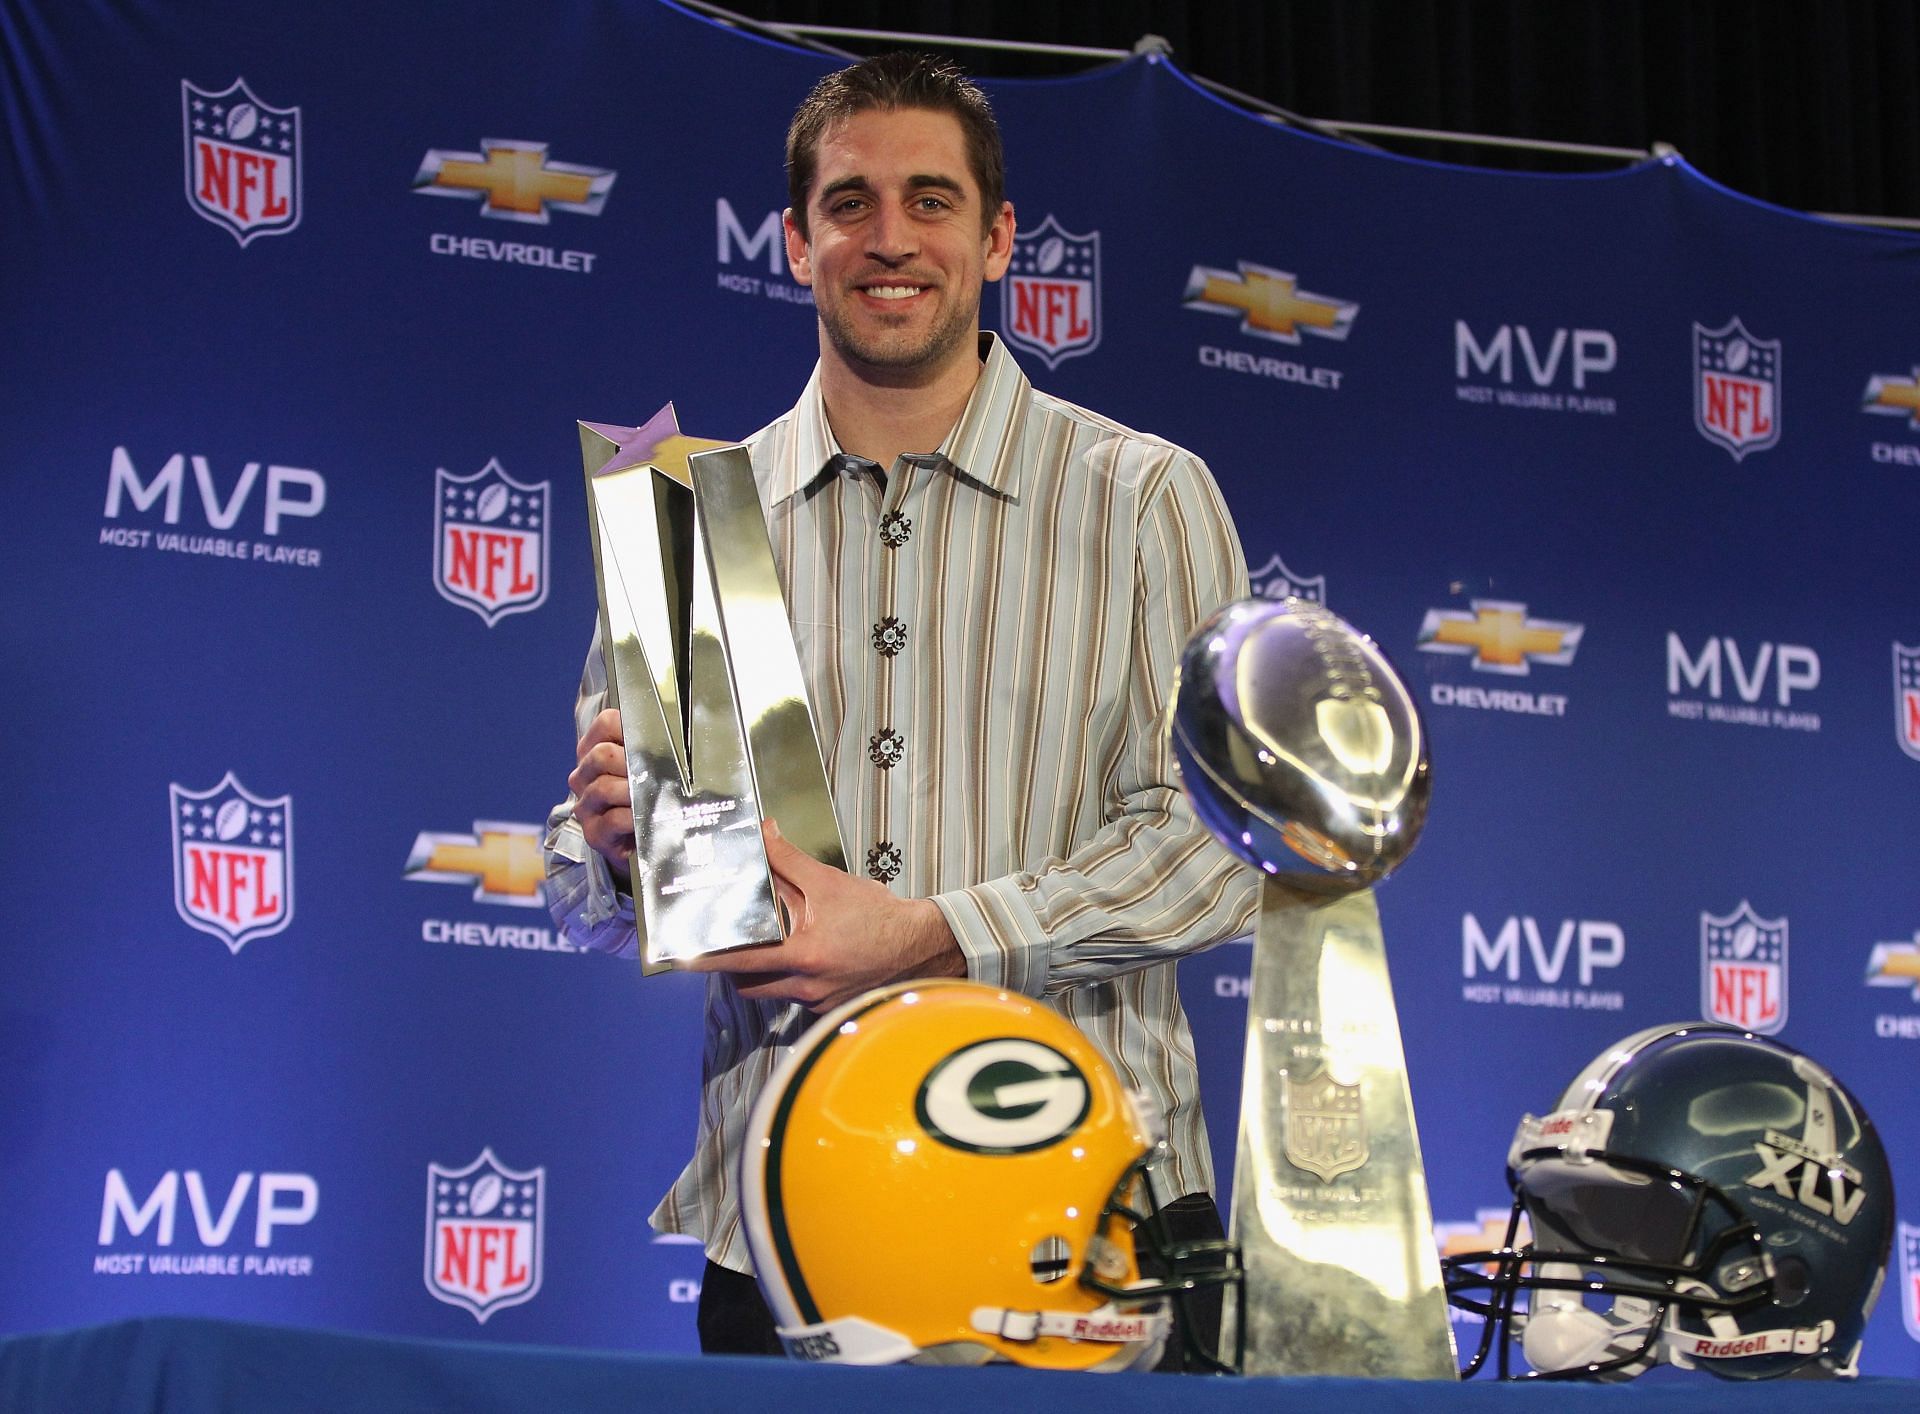 How many Super Bowl rings does Aaron Rodgers have?